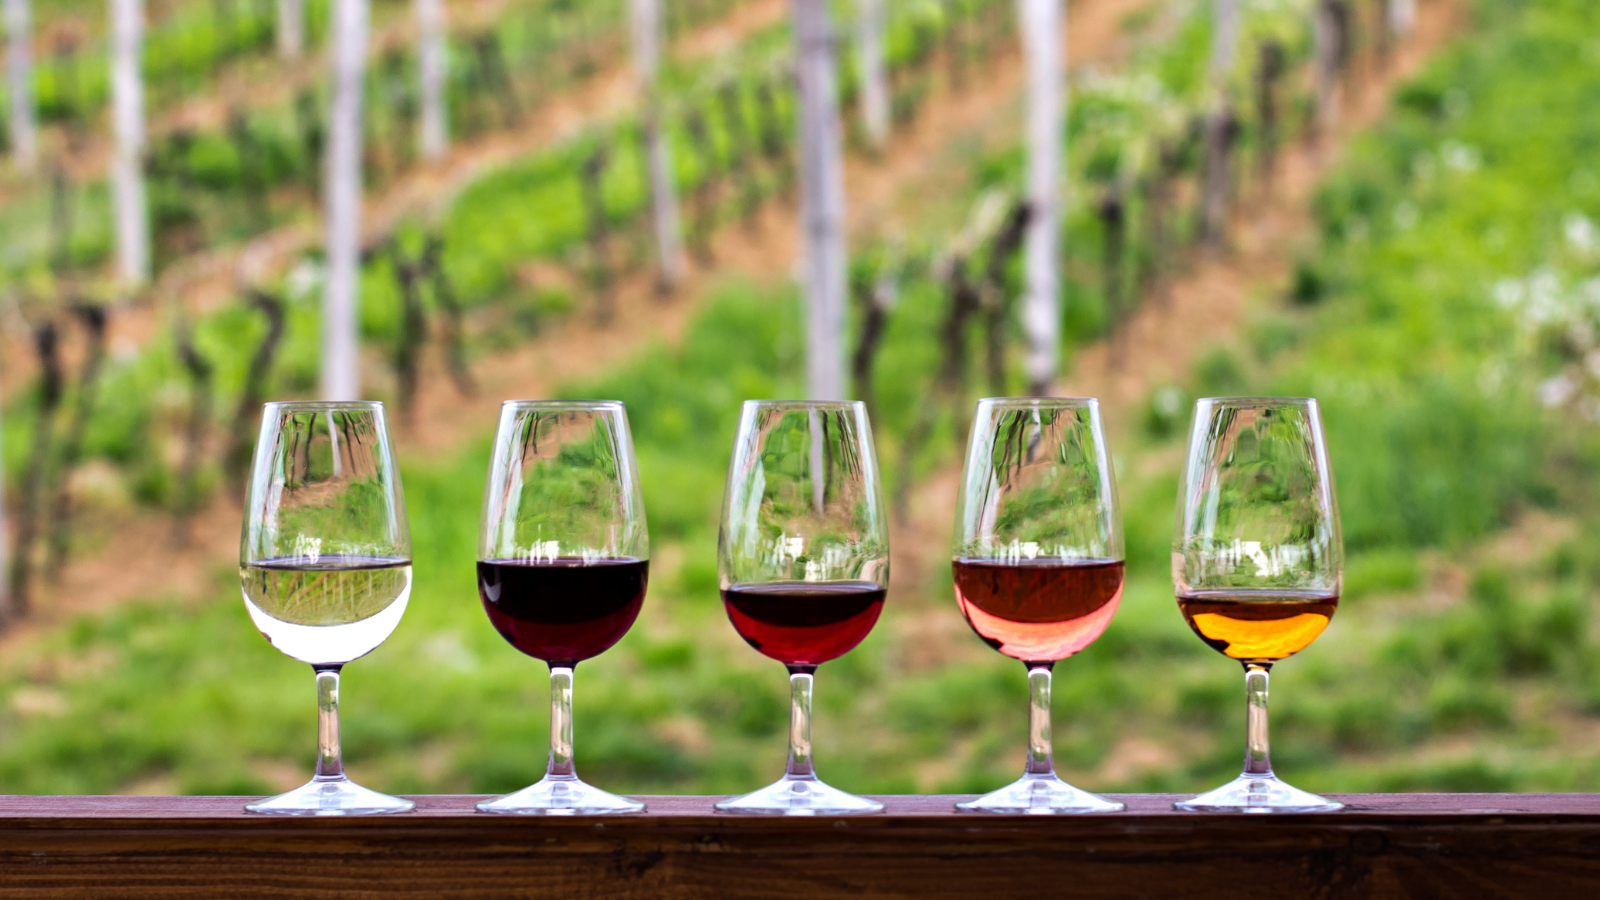 Go wine tasting - the seventh thing in the list of 10 best things to do in Portugal